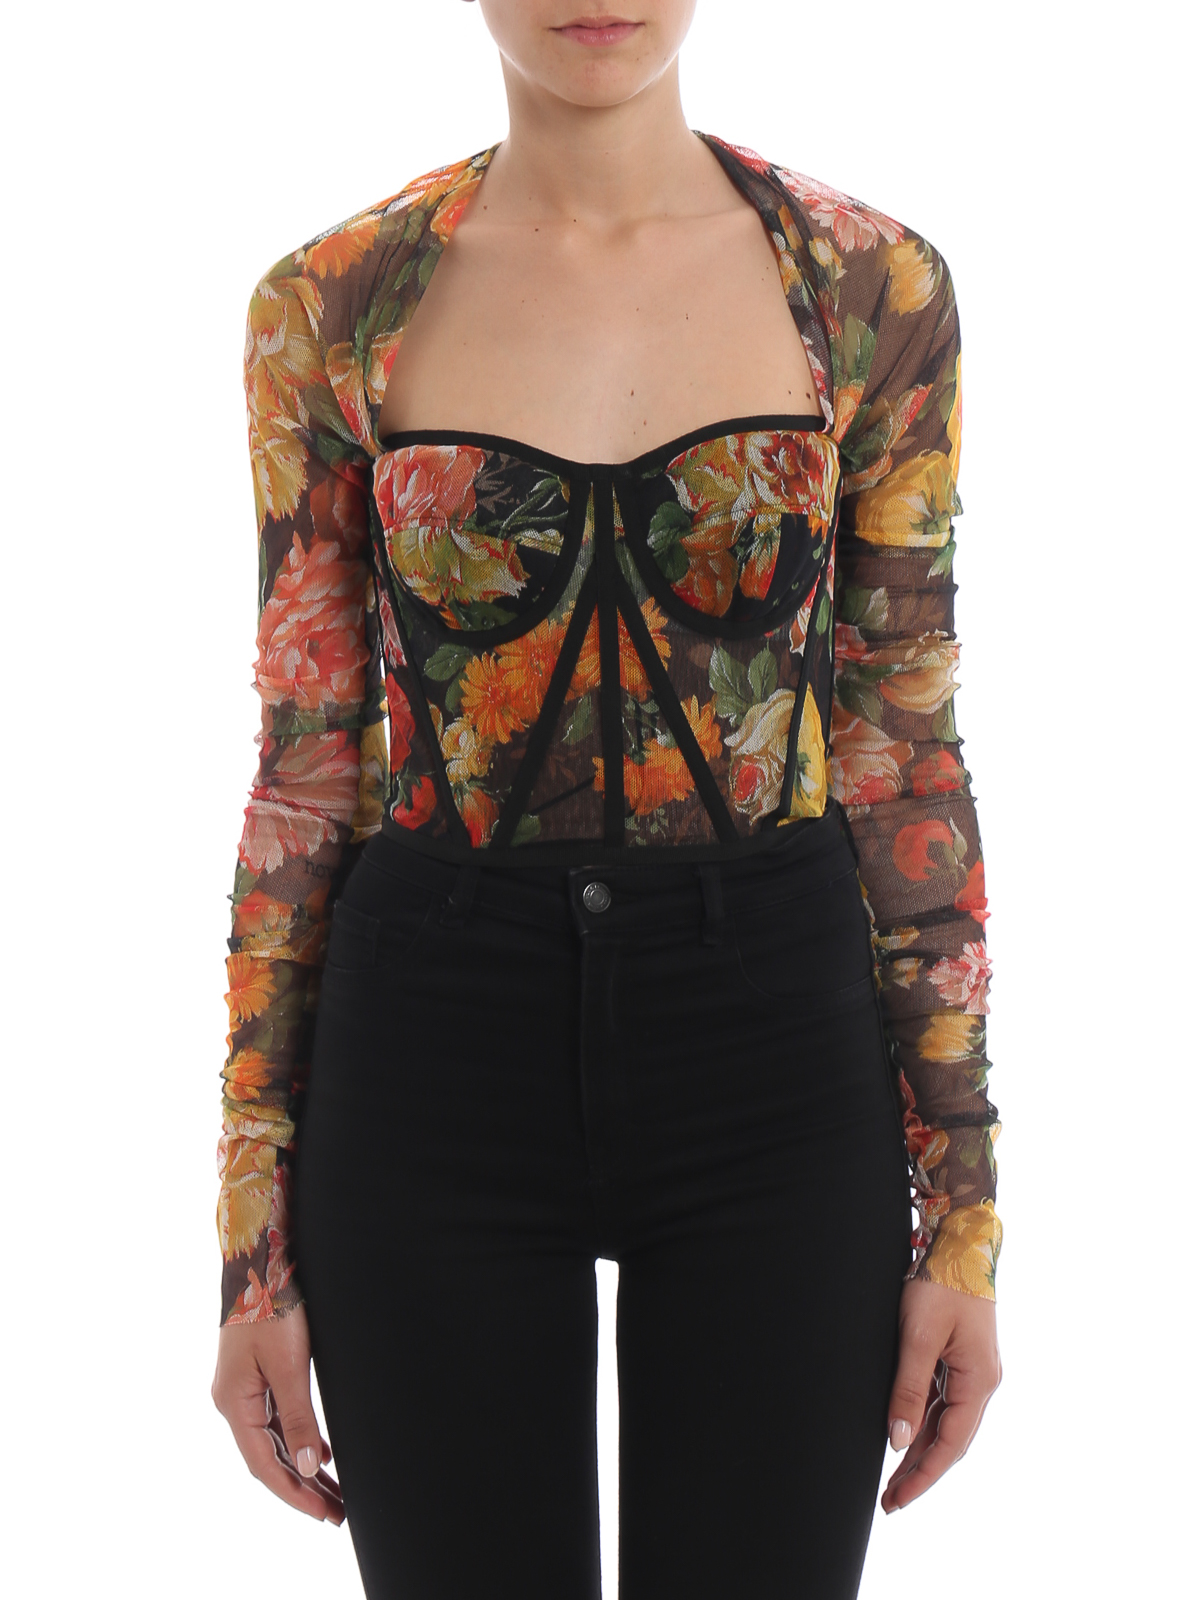 dolce and gabbana floral top